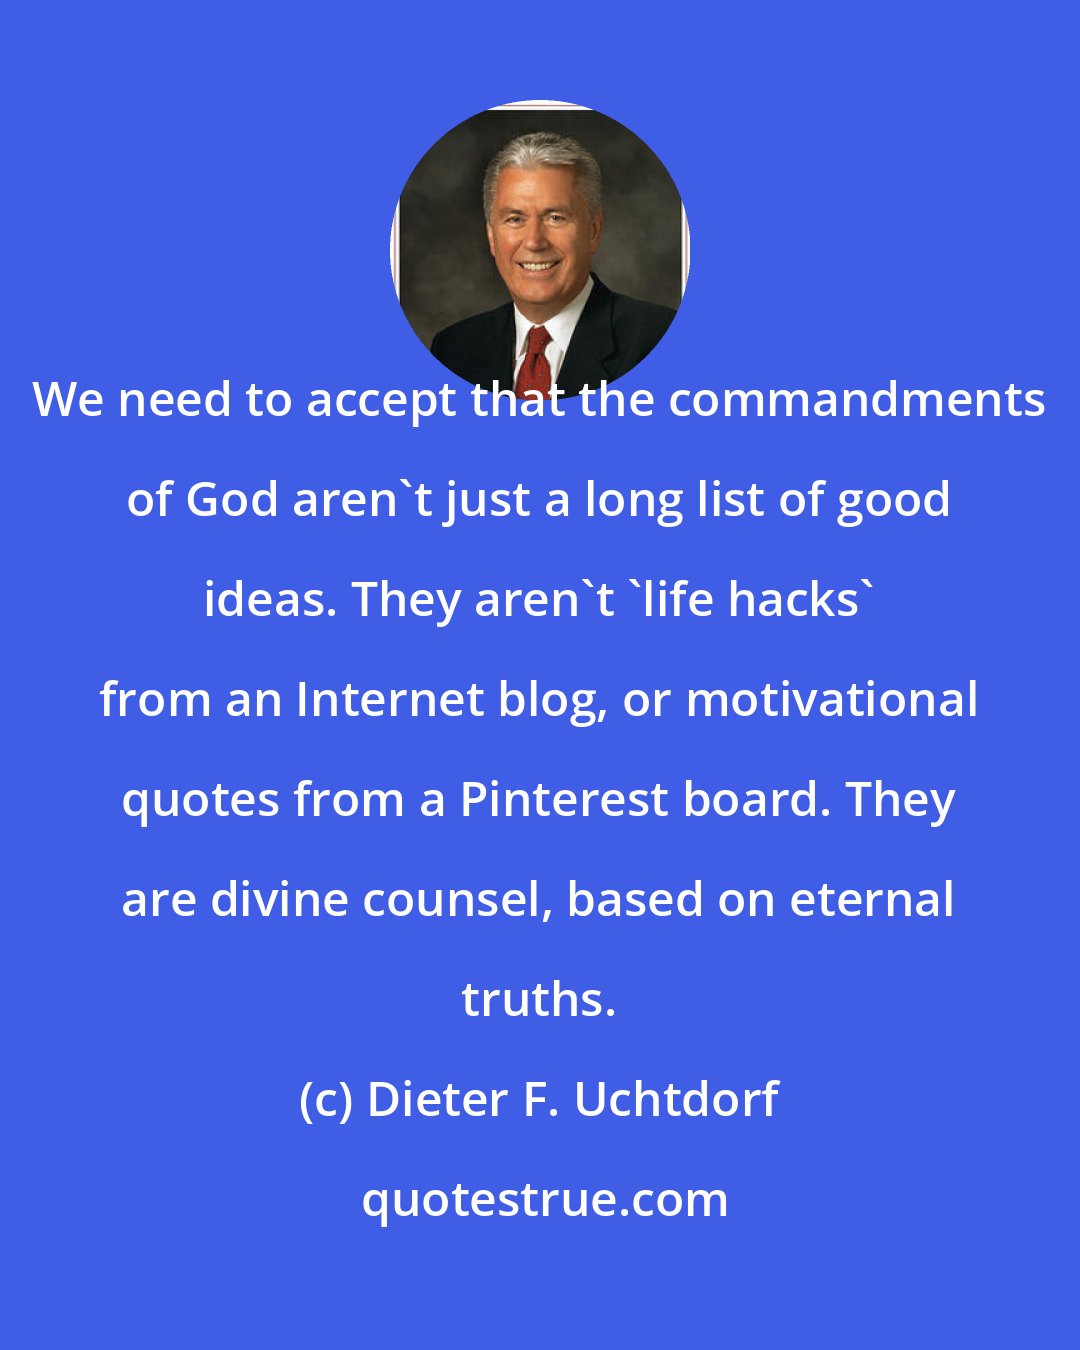 Dieter F. Uchtdorf: We need to accept that the commandments of God aren't just a long list of good ideas. They aren't 'life hacks' from an Internet blog, or motivational quotes from a Pinterest board. They are divine counsel, based on eternal truths.